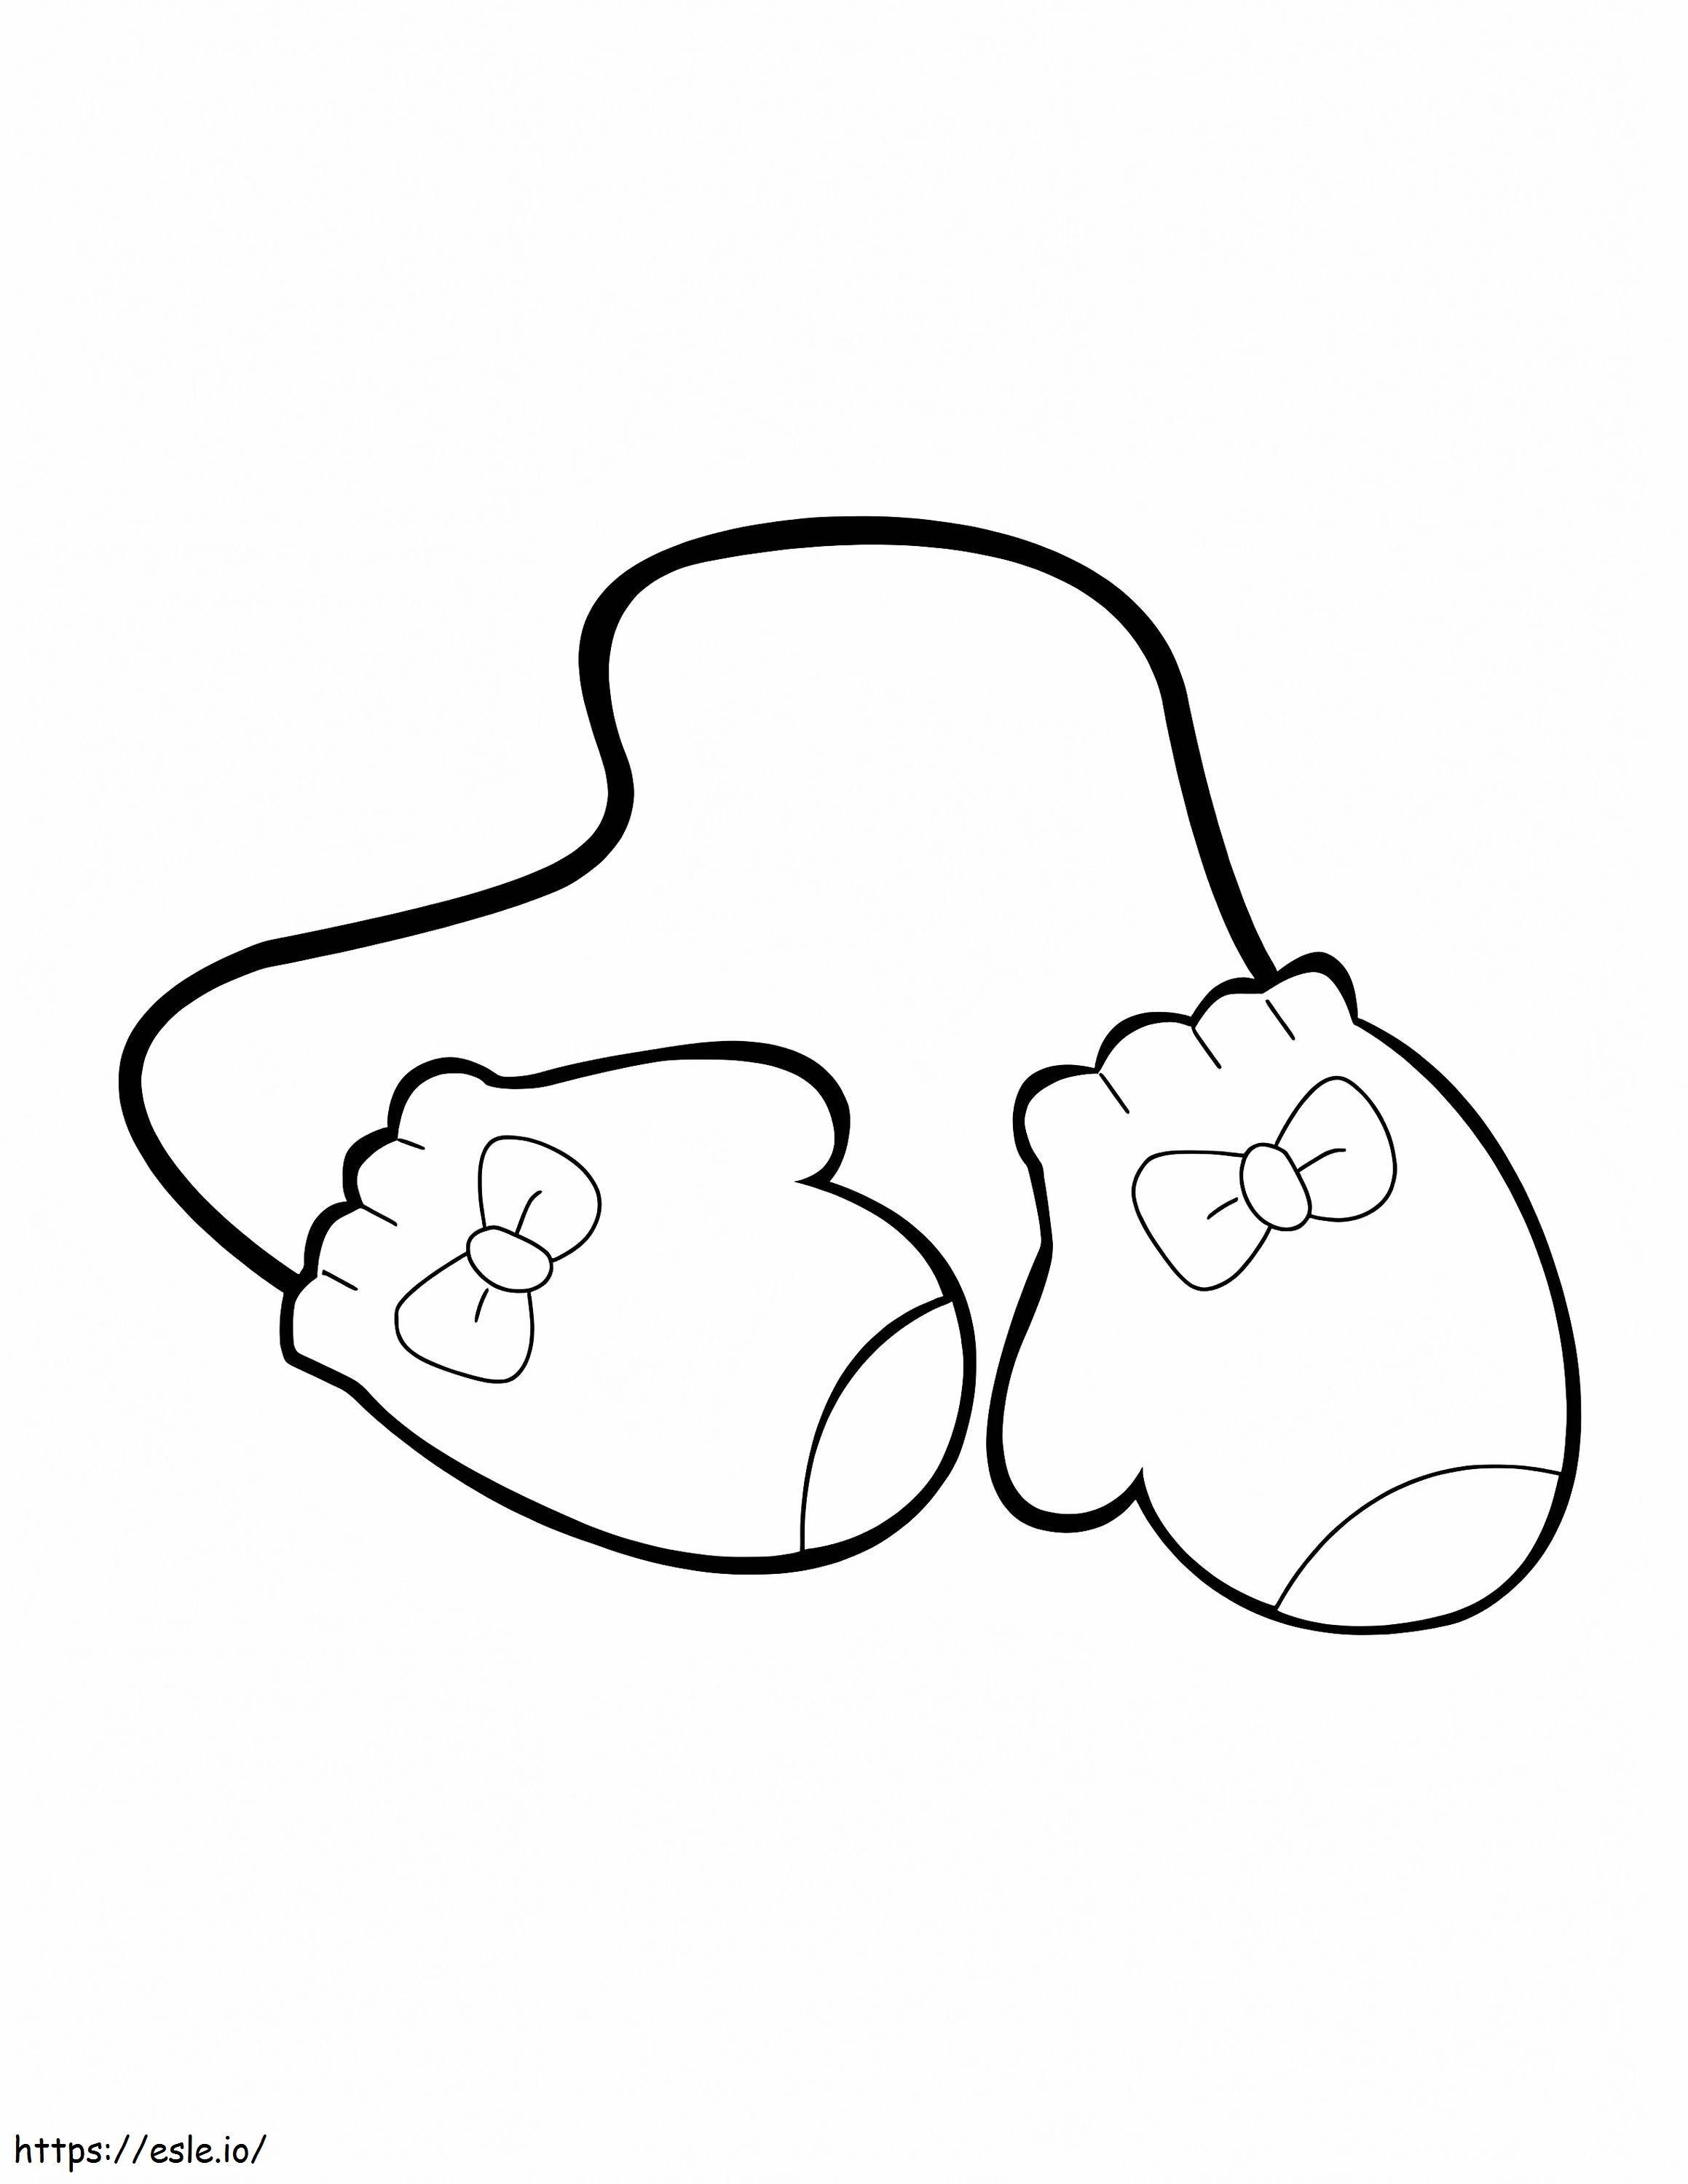 Cute Winter Mittens coloring page